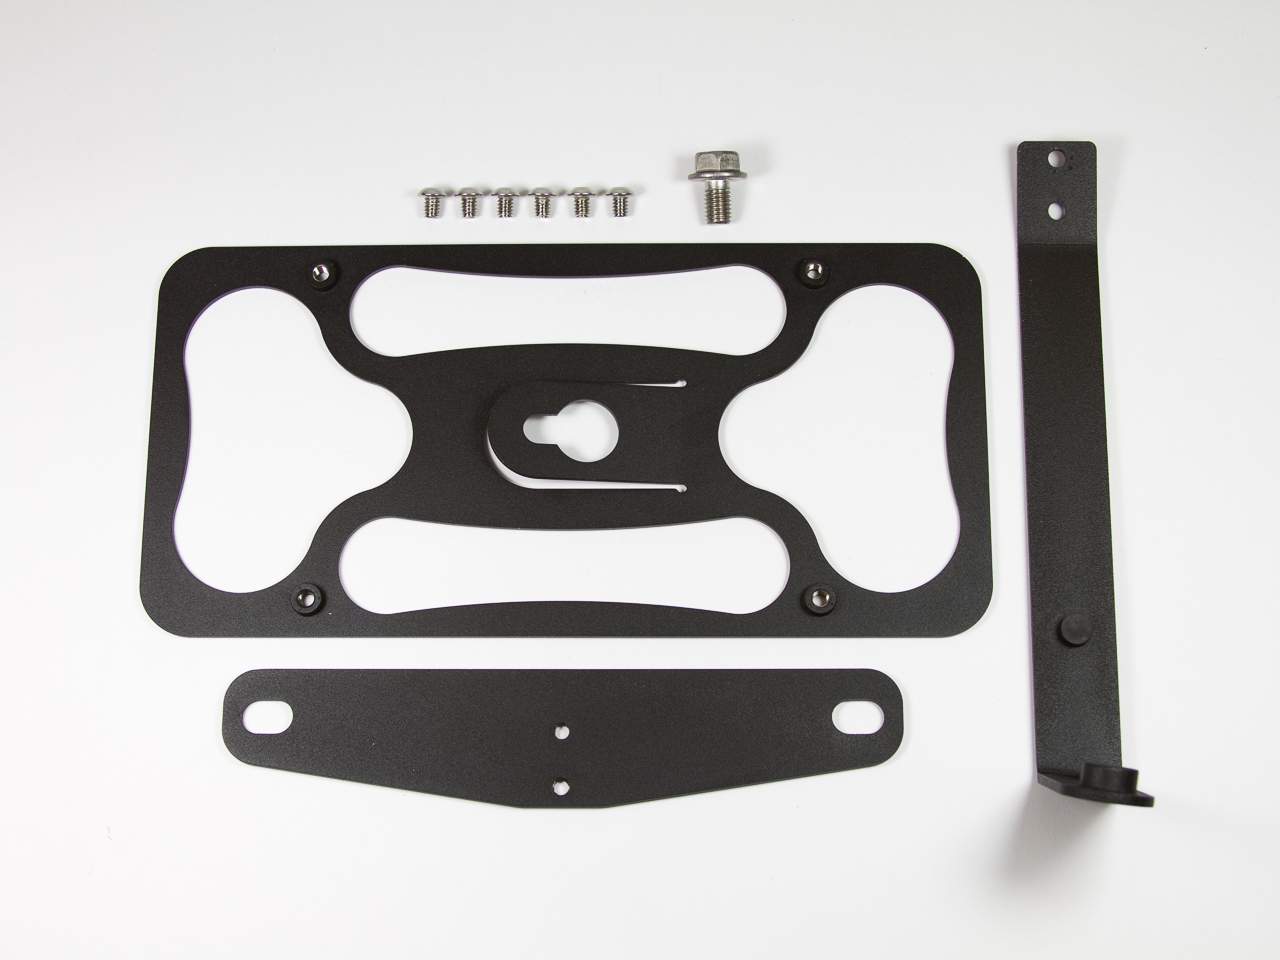 Parts list for The Platypus License Plate Mount for 2008-2022 Fiat 500 Abarth and Turbo